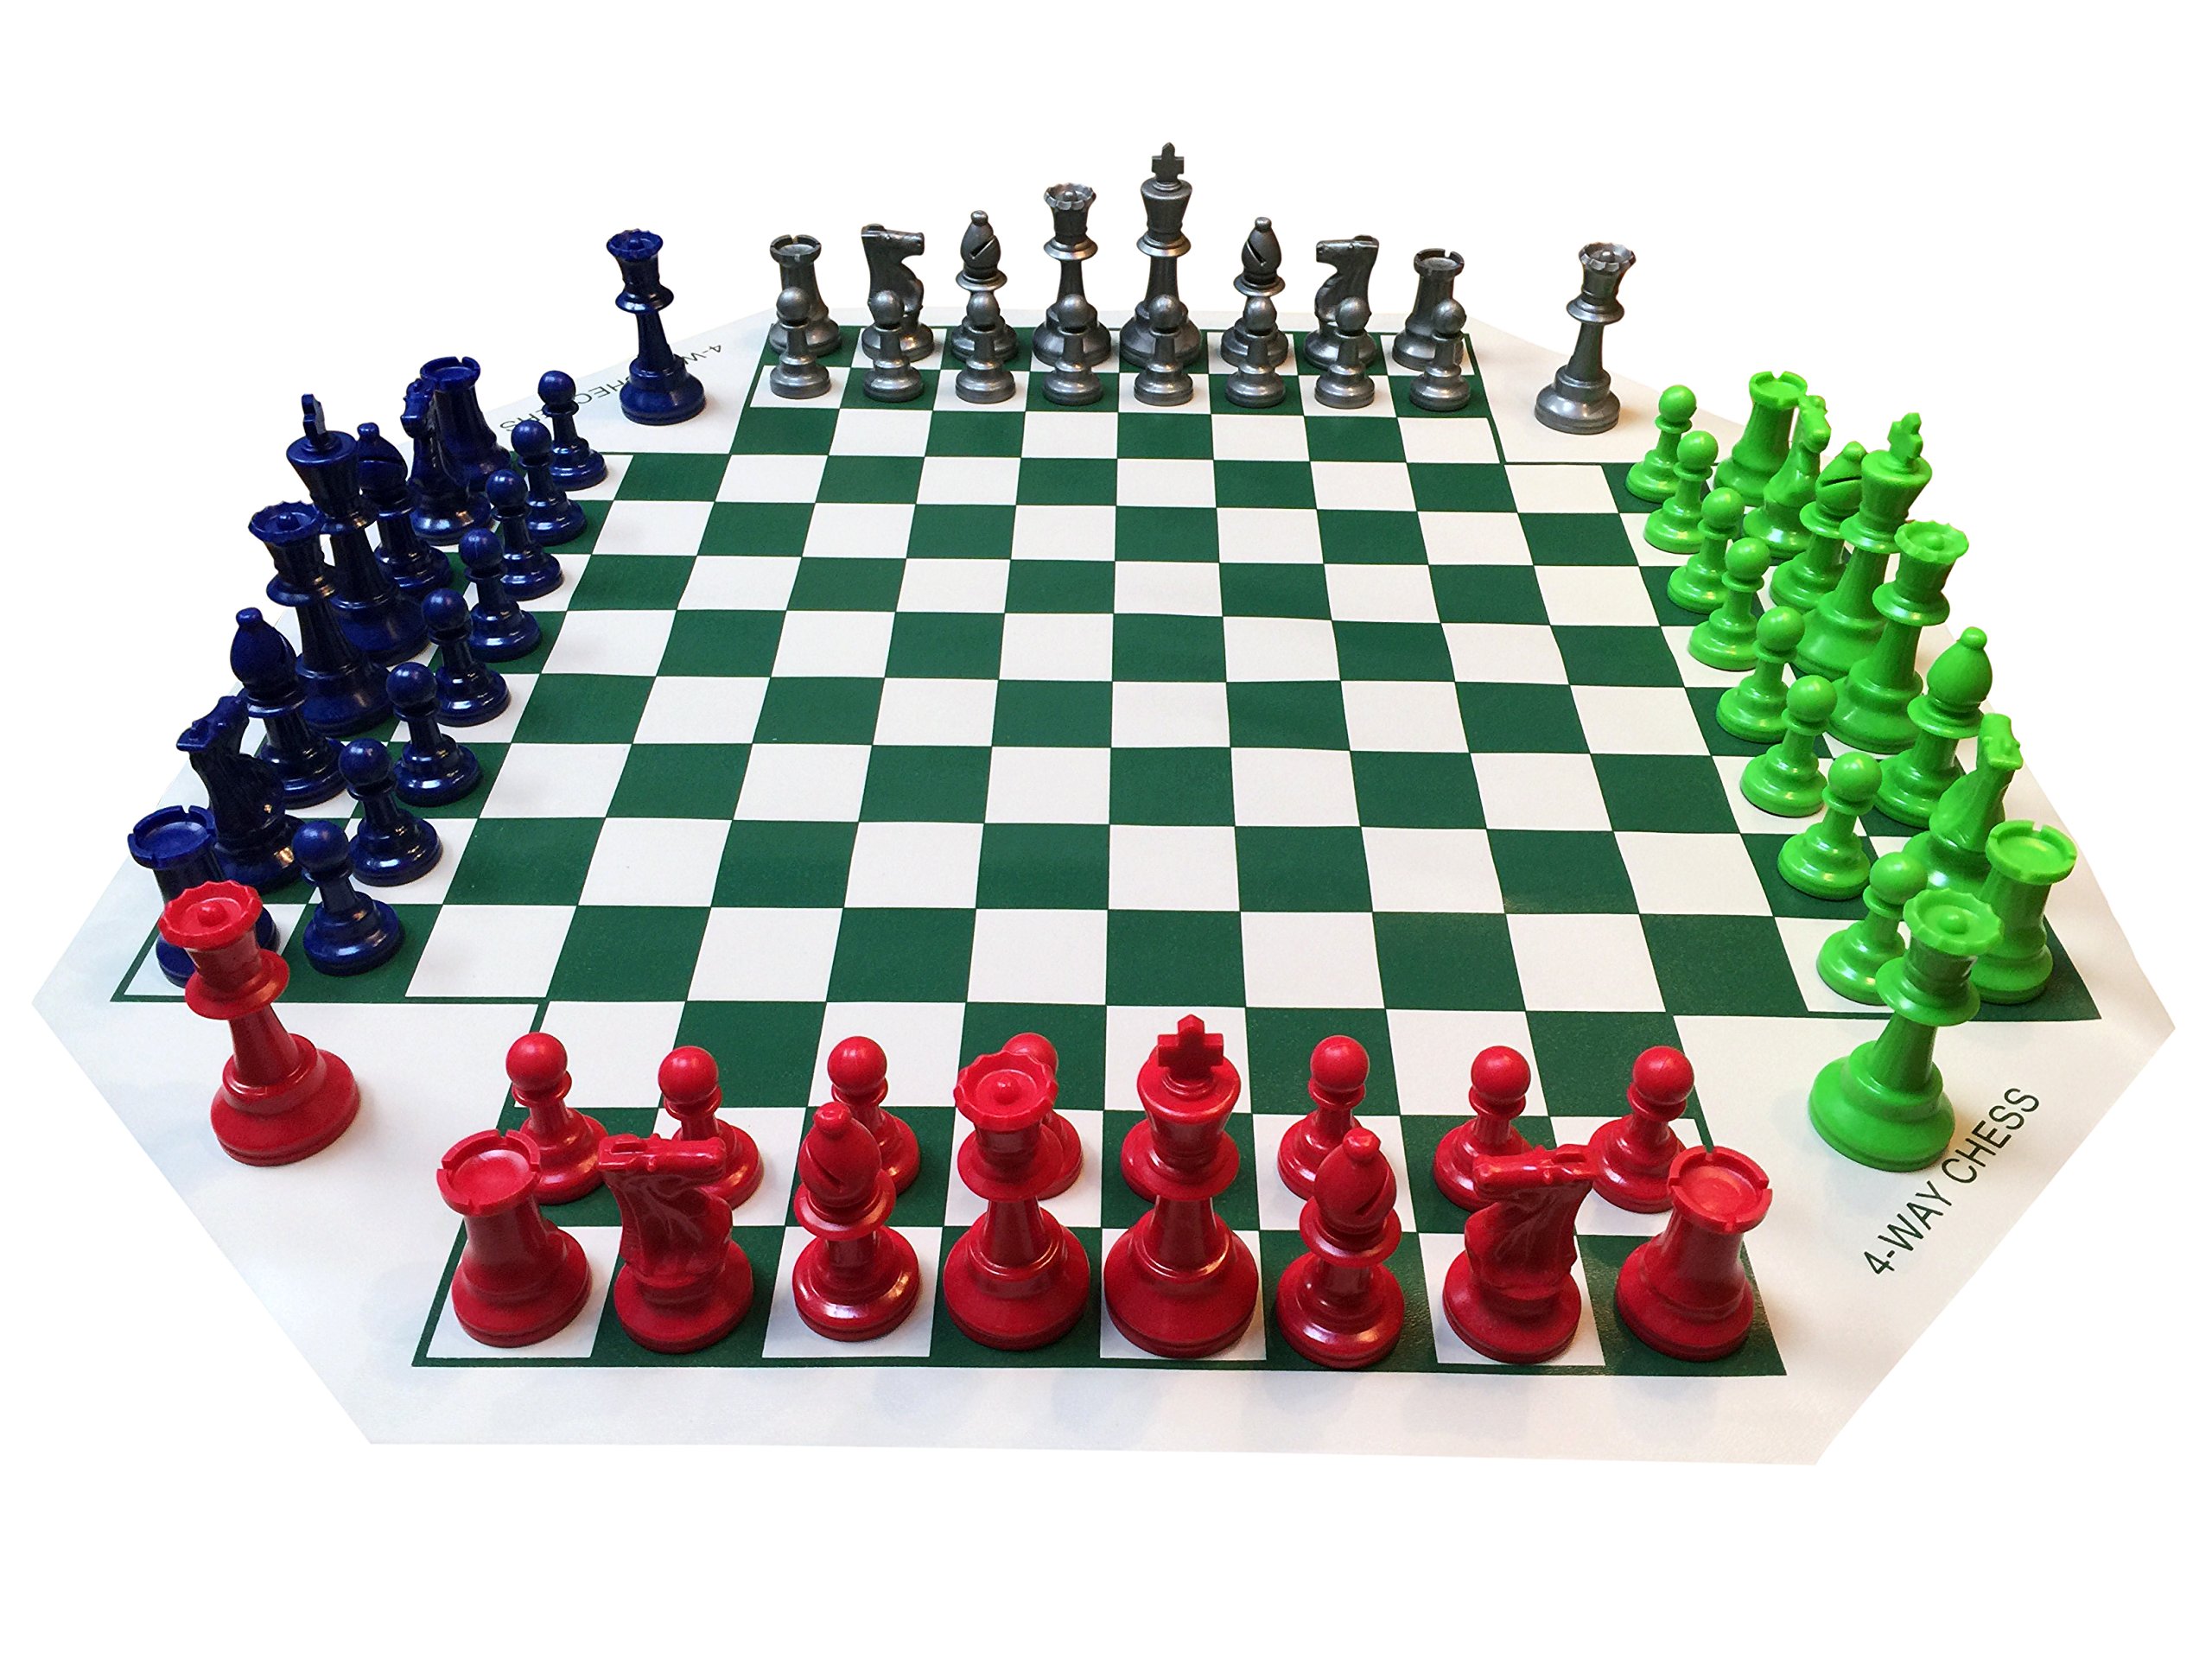 WE Games Four Player Chess Set, Chess Board for Team Chess, Combination Chess Game for Up to 4 Players, Unique Chess Sets for Adults and Kids, Roll Up Vinyl Chess Mat with 4 Sets of Chess Pieces